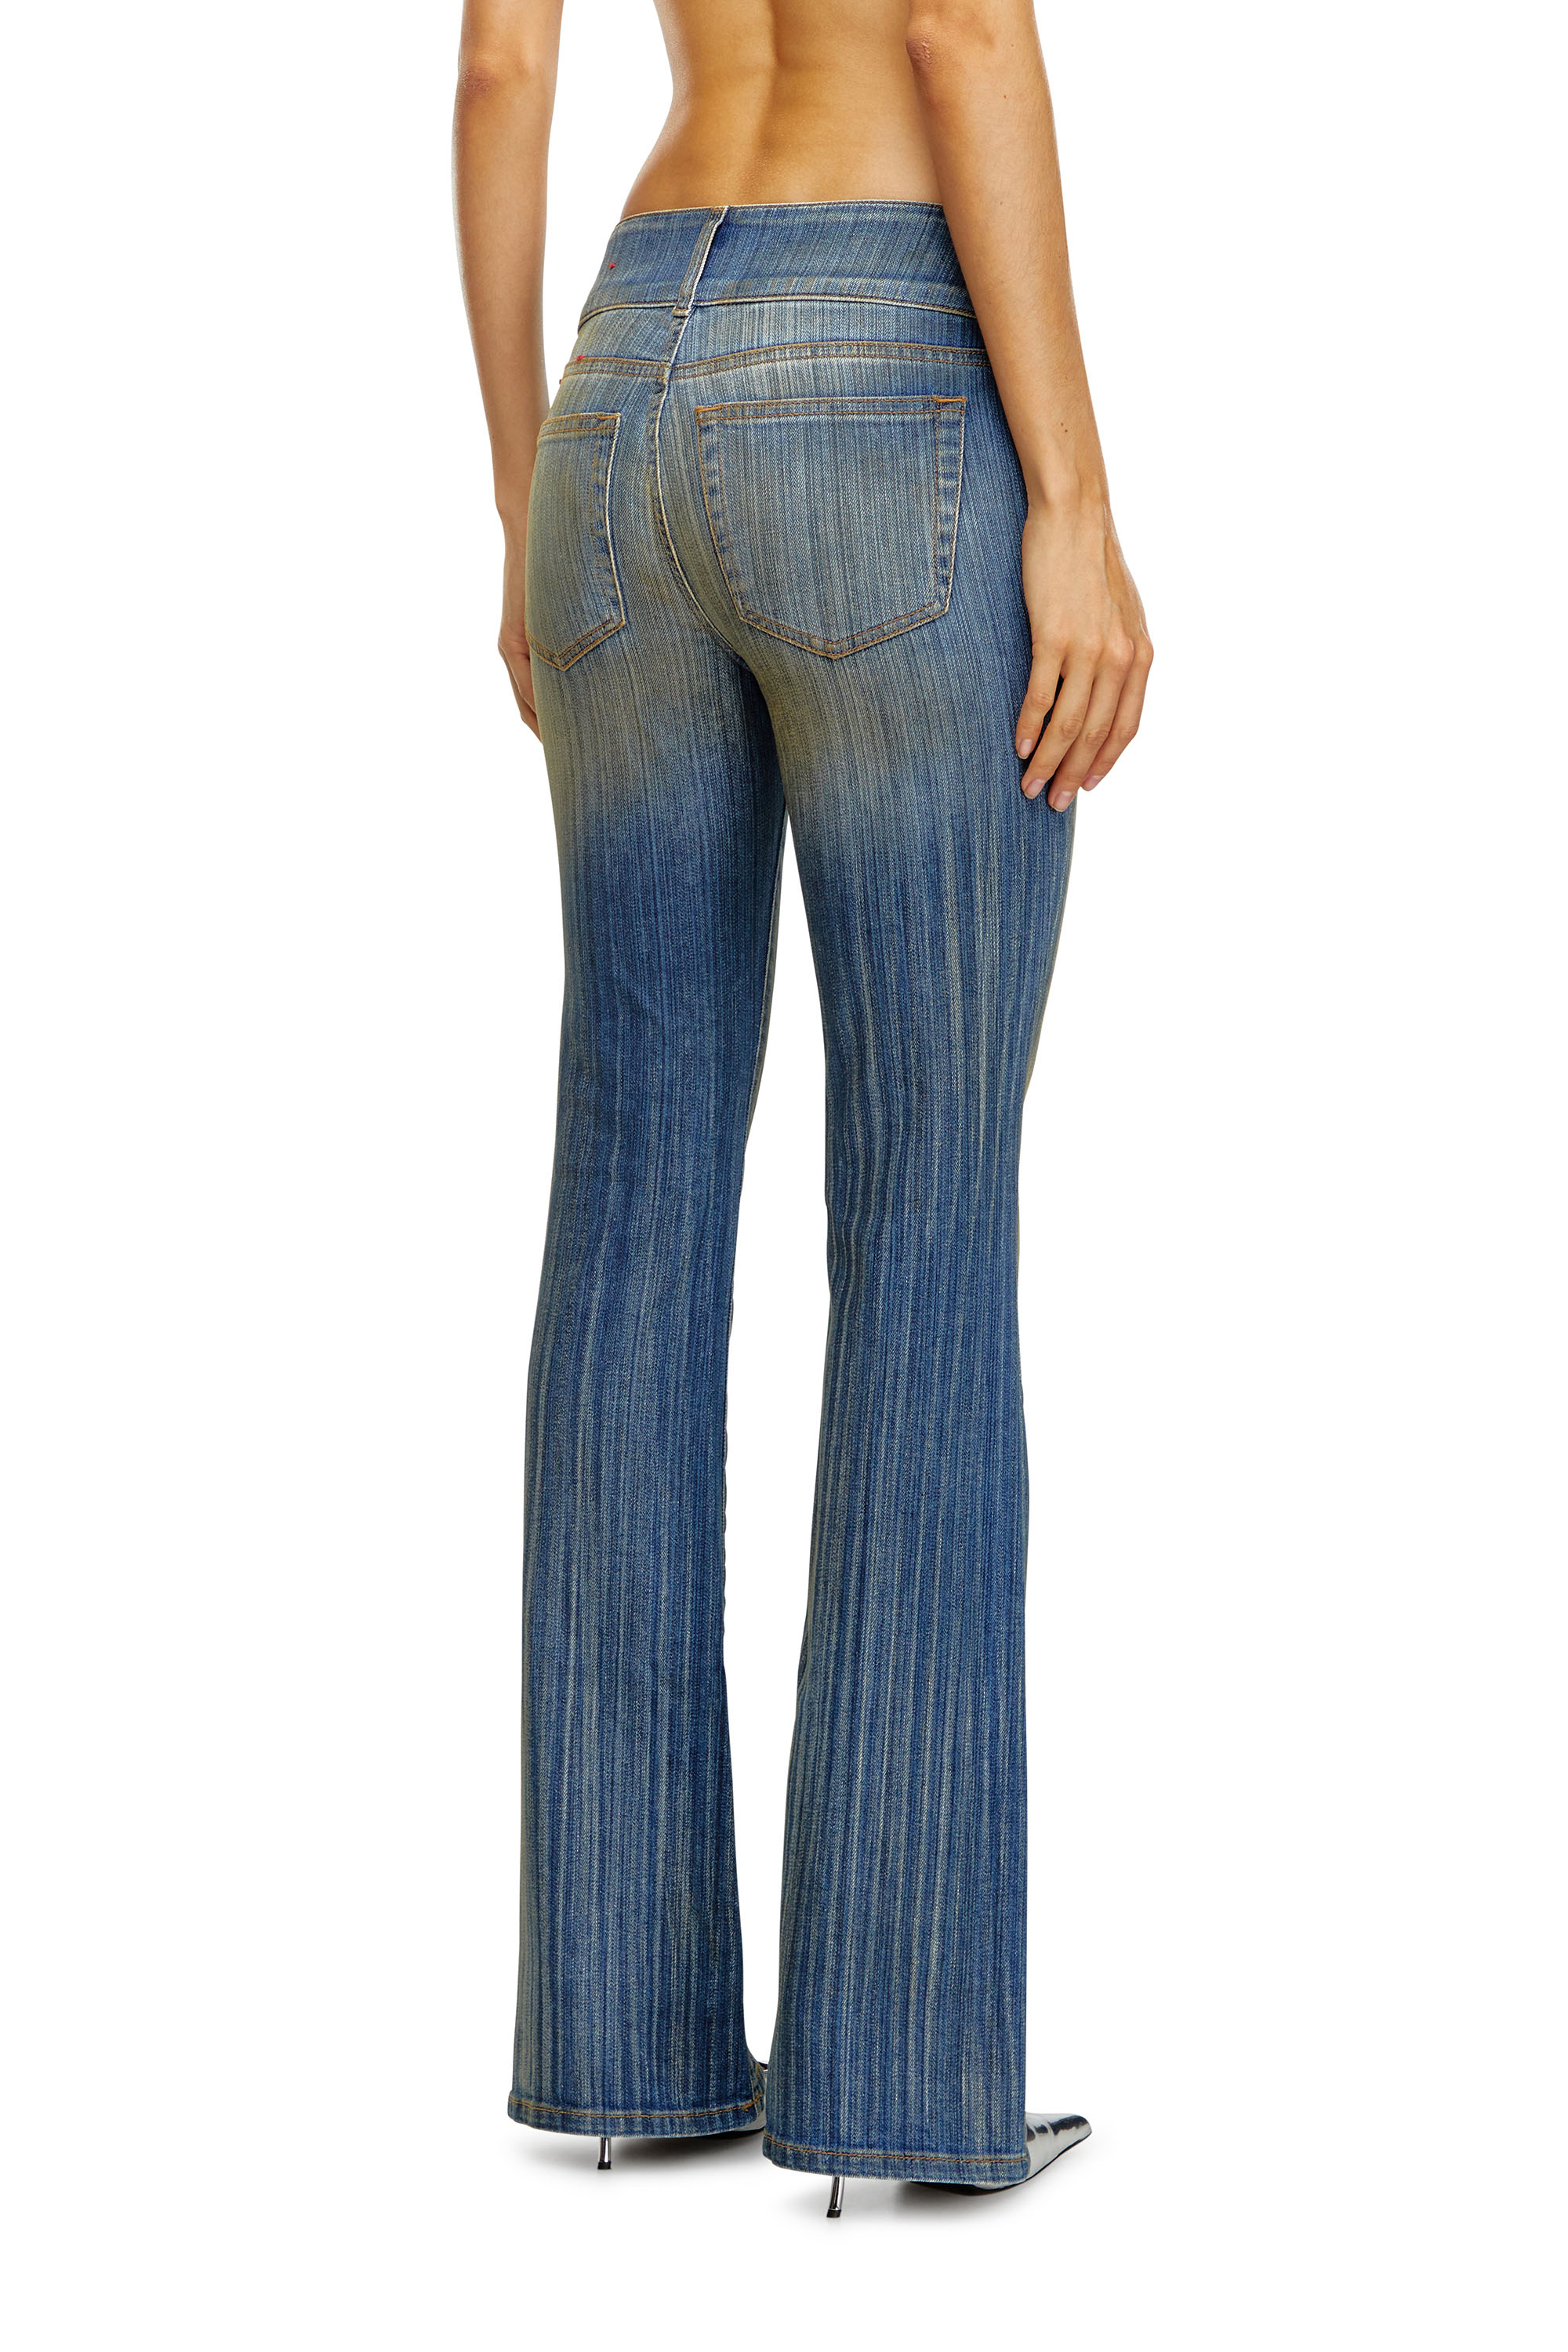 Diesel - Bootcut and Flare Jeans D-Propol 0CBCX, Mujer Bootcut y Flare Jeans - D-Propol in Azul marino - Image 4